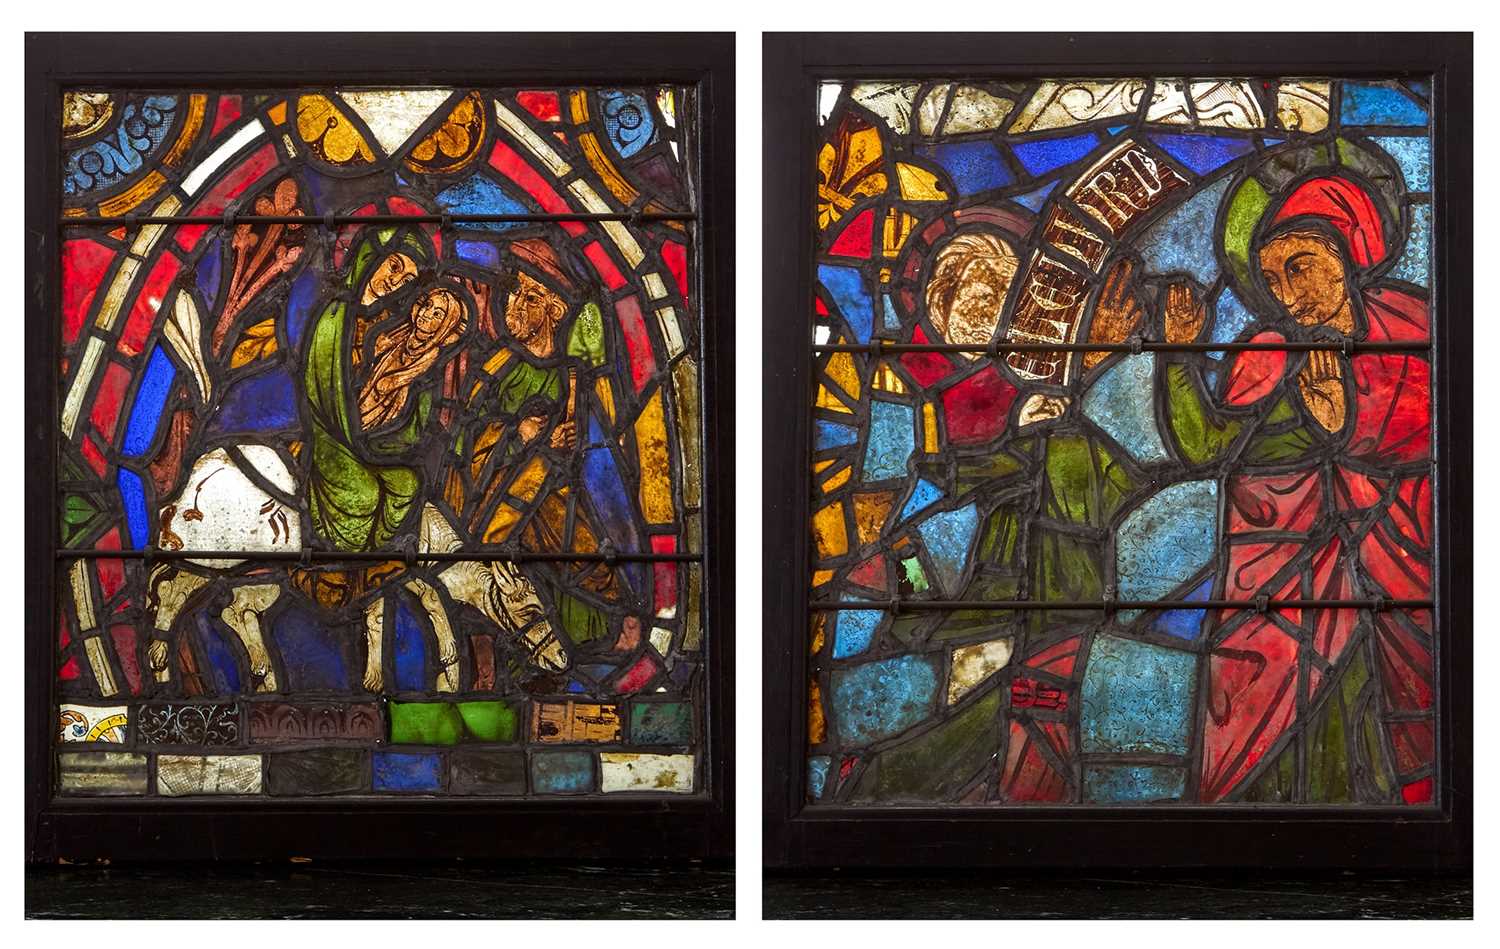 Lot 66 - Two French Romanesque Stained Glass Panels Fragments Depicting the Flight Into Egypt